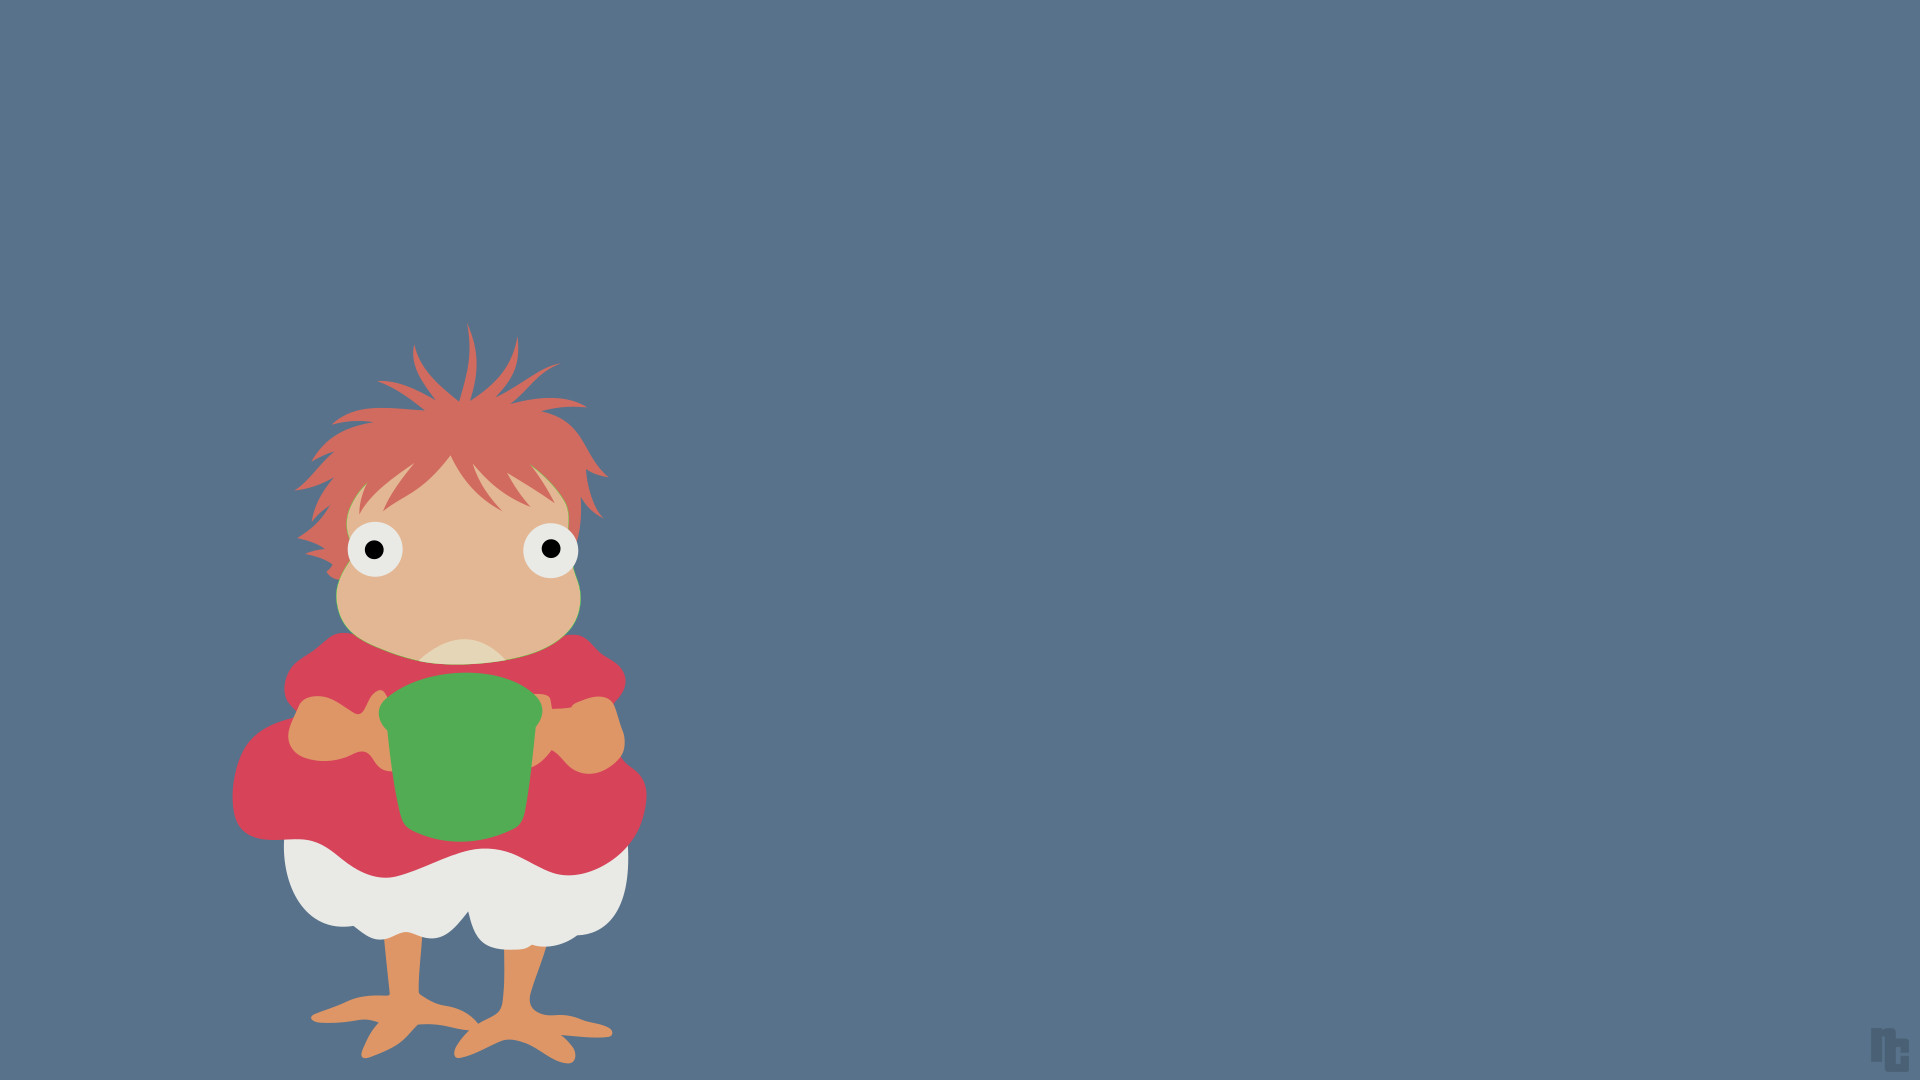 1920x1080 ... Ponyo (Ponyo on the Cliff by the Sea) by ncoll36